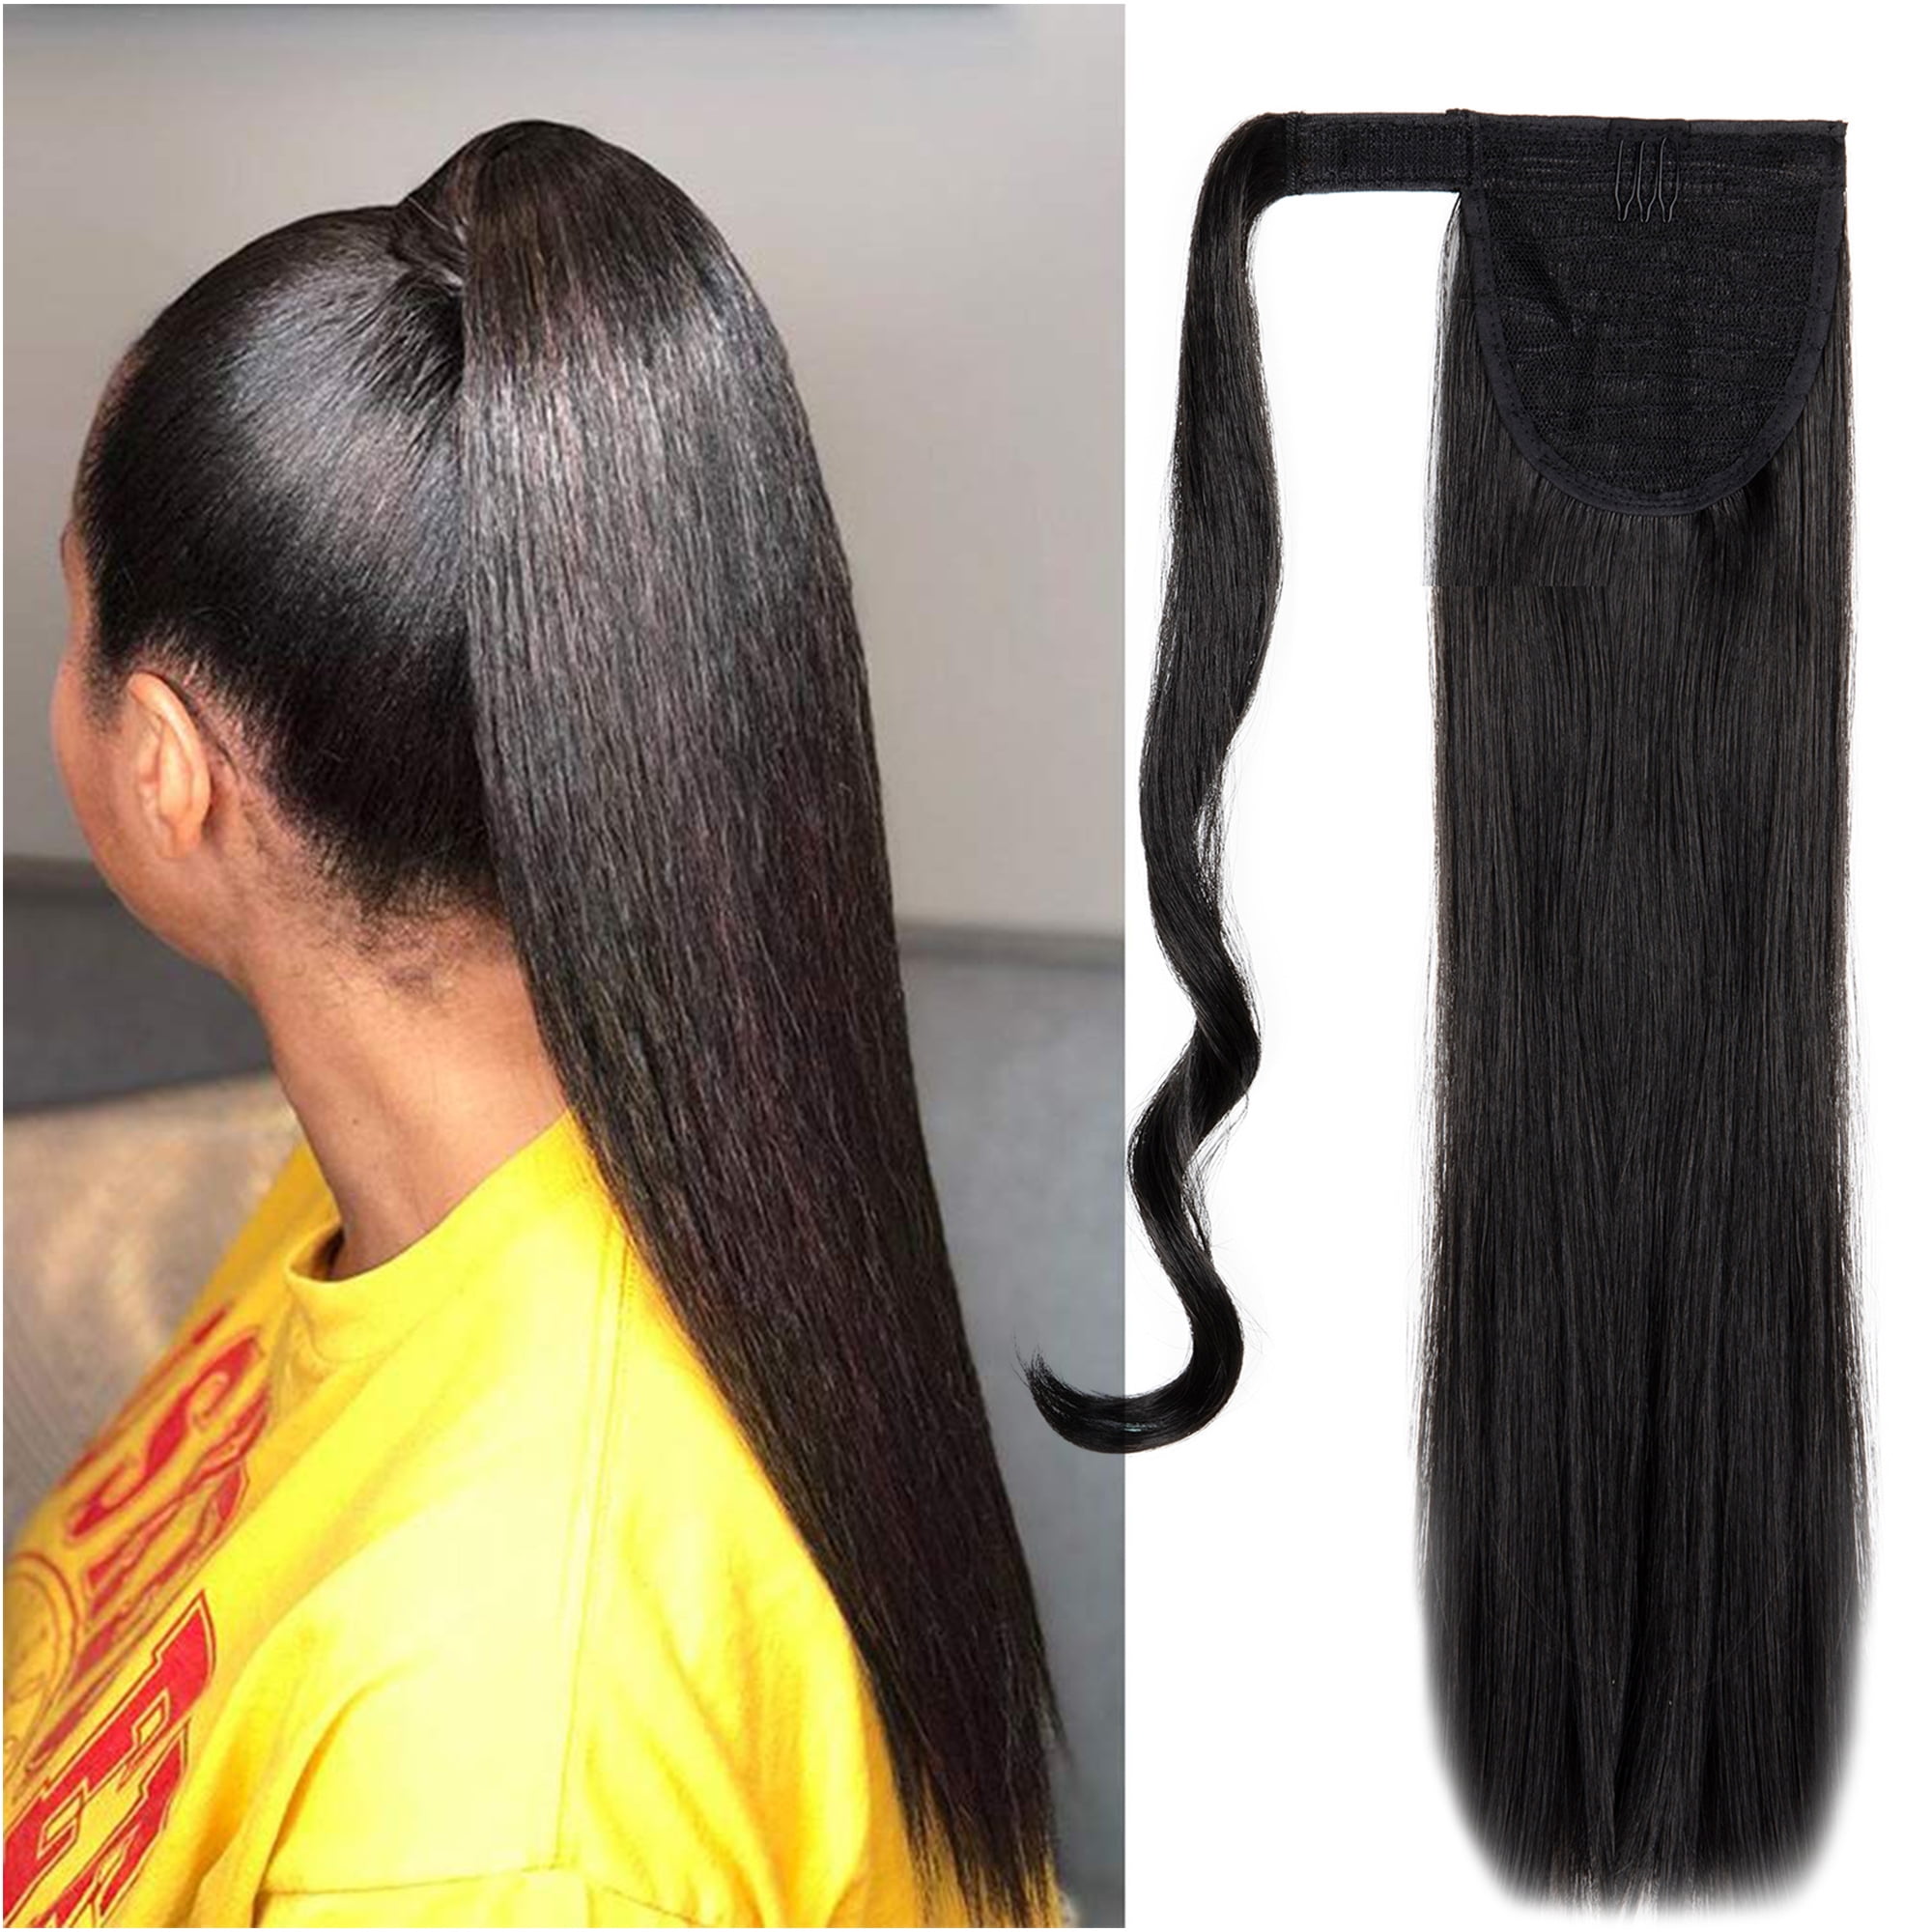 Black Brown Ponytail HairPiece Extension-Clip in Ponytail Hair Extensions  Hair Wrap Around Ponytail Long Straight Ponytail Hairpiece Pony Tails Hair  Extensions for Women 20Inch,80g 